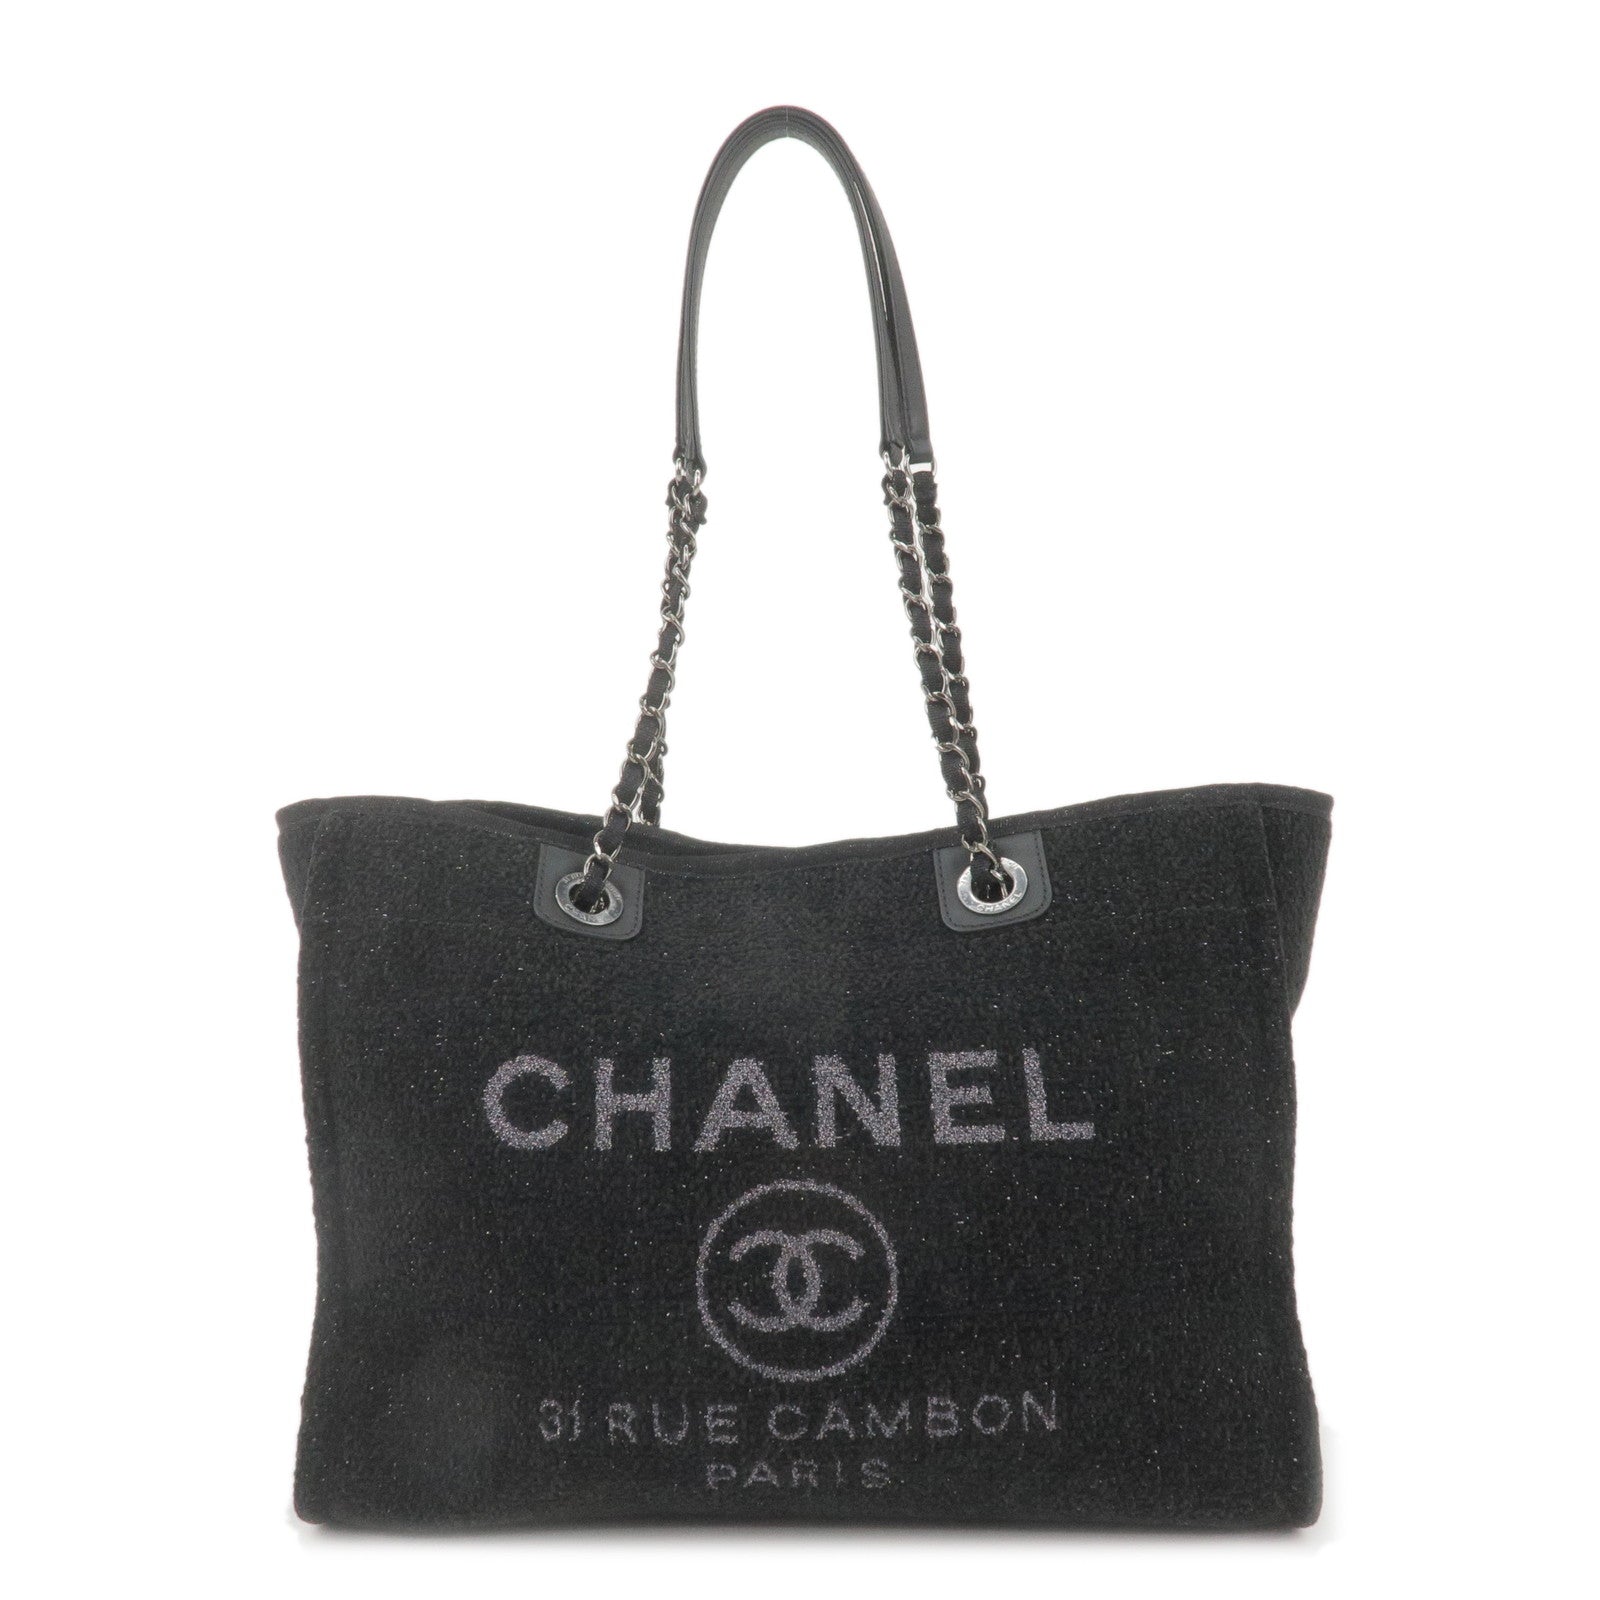 CHANEL-Deauville-Tweed-Leather-Deauville-MM-Chain-Tote-Bag-A67001